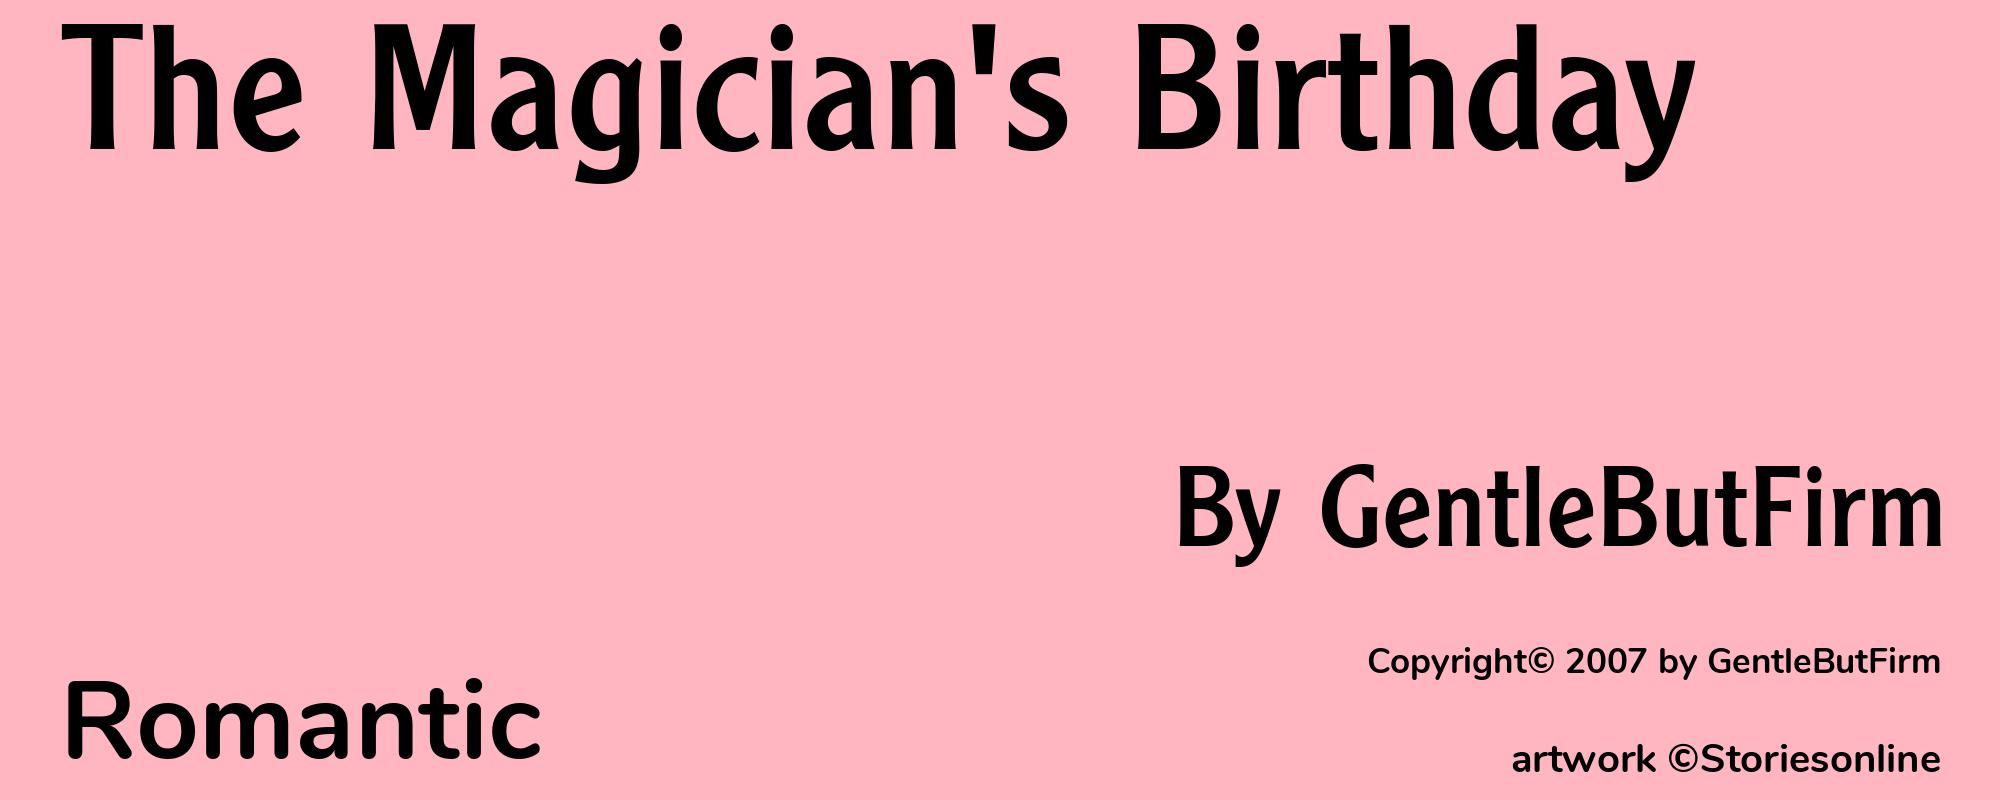 The Magician's Birthday - Cover